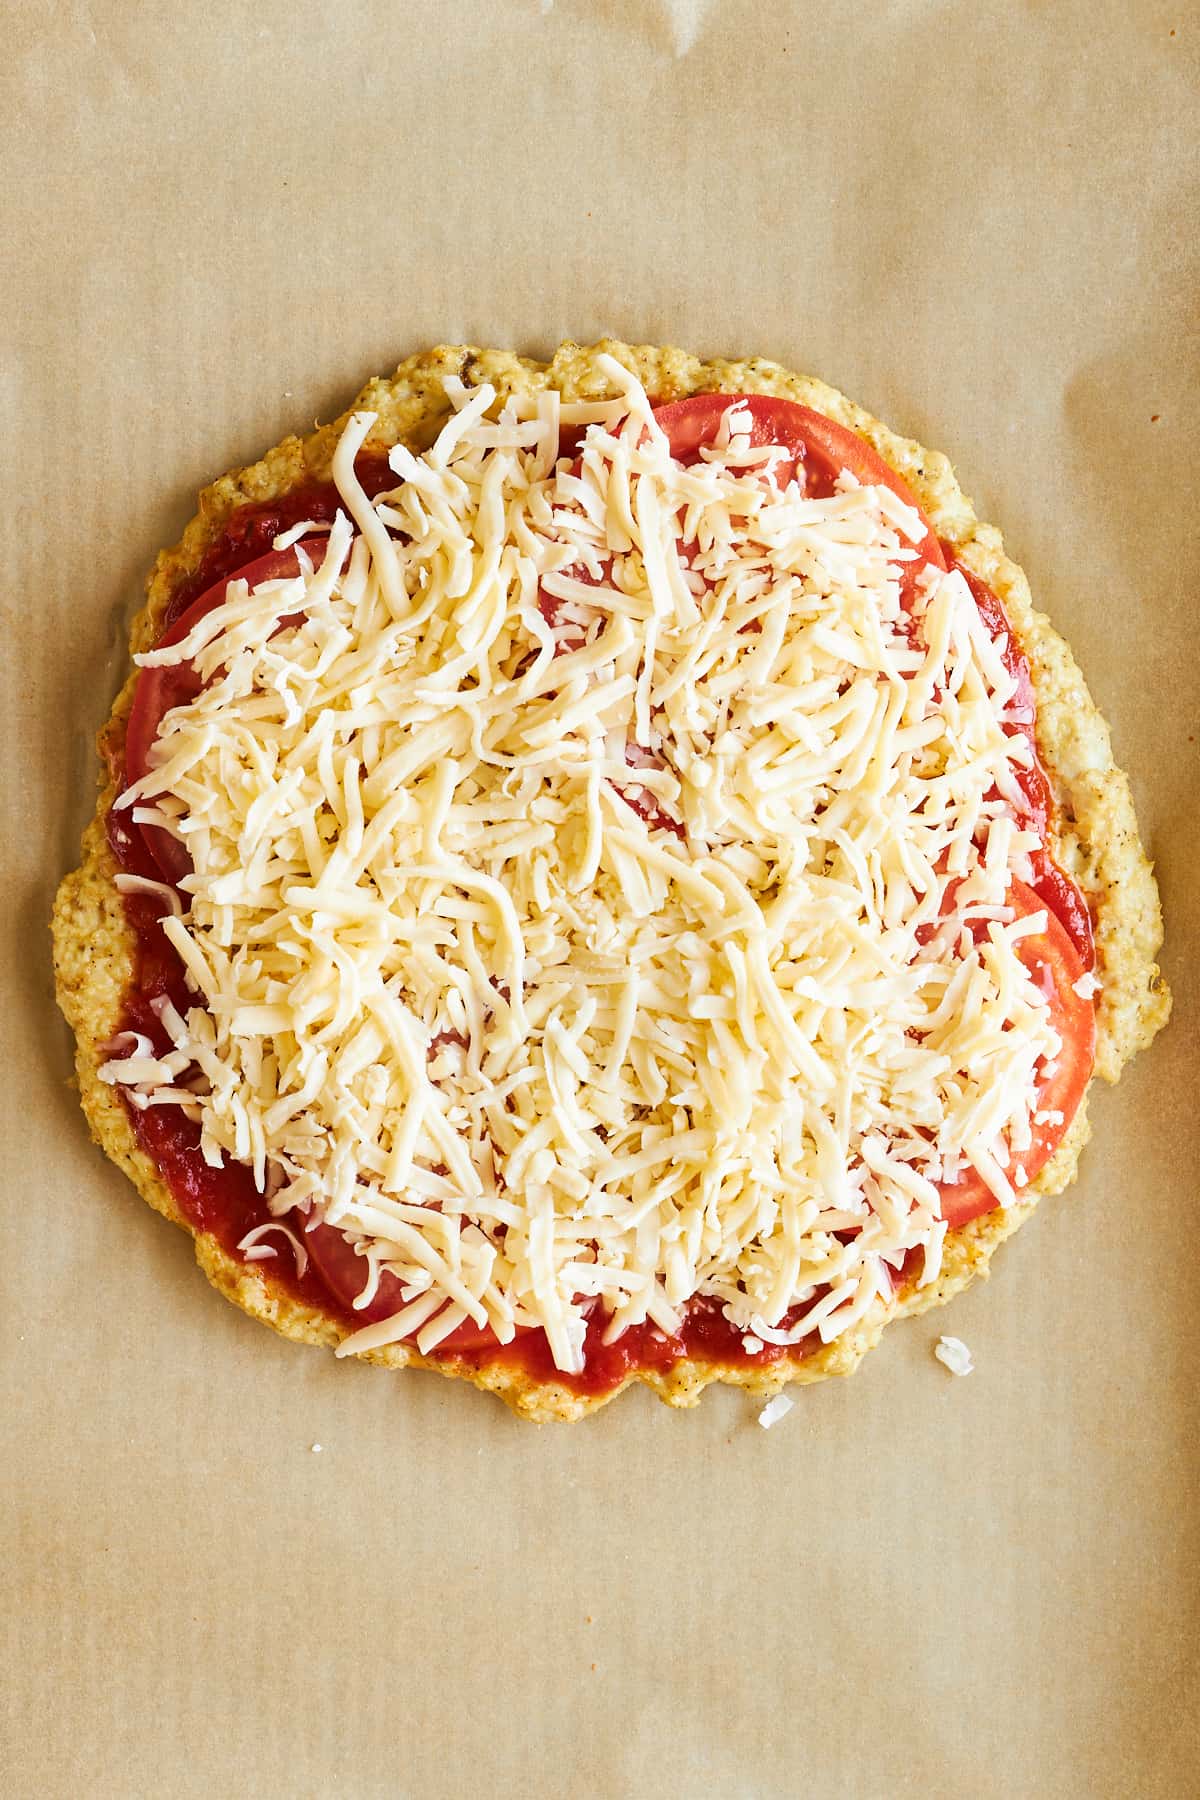 Chicken pizza crust topped with marinara sauce, tomatoes, and cheese. 